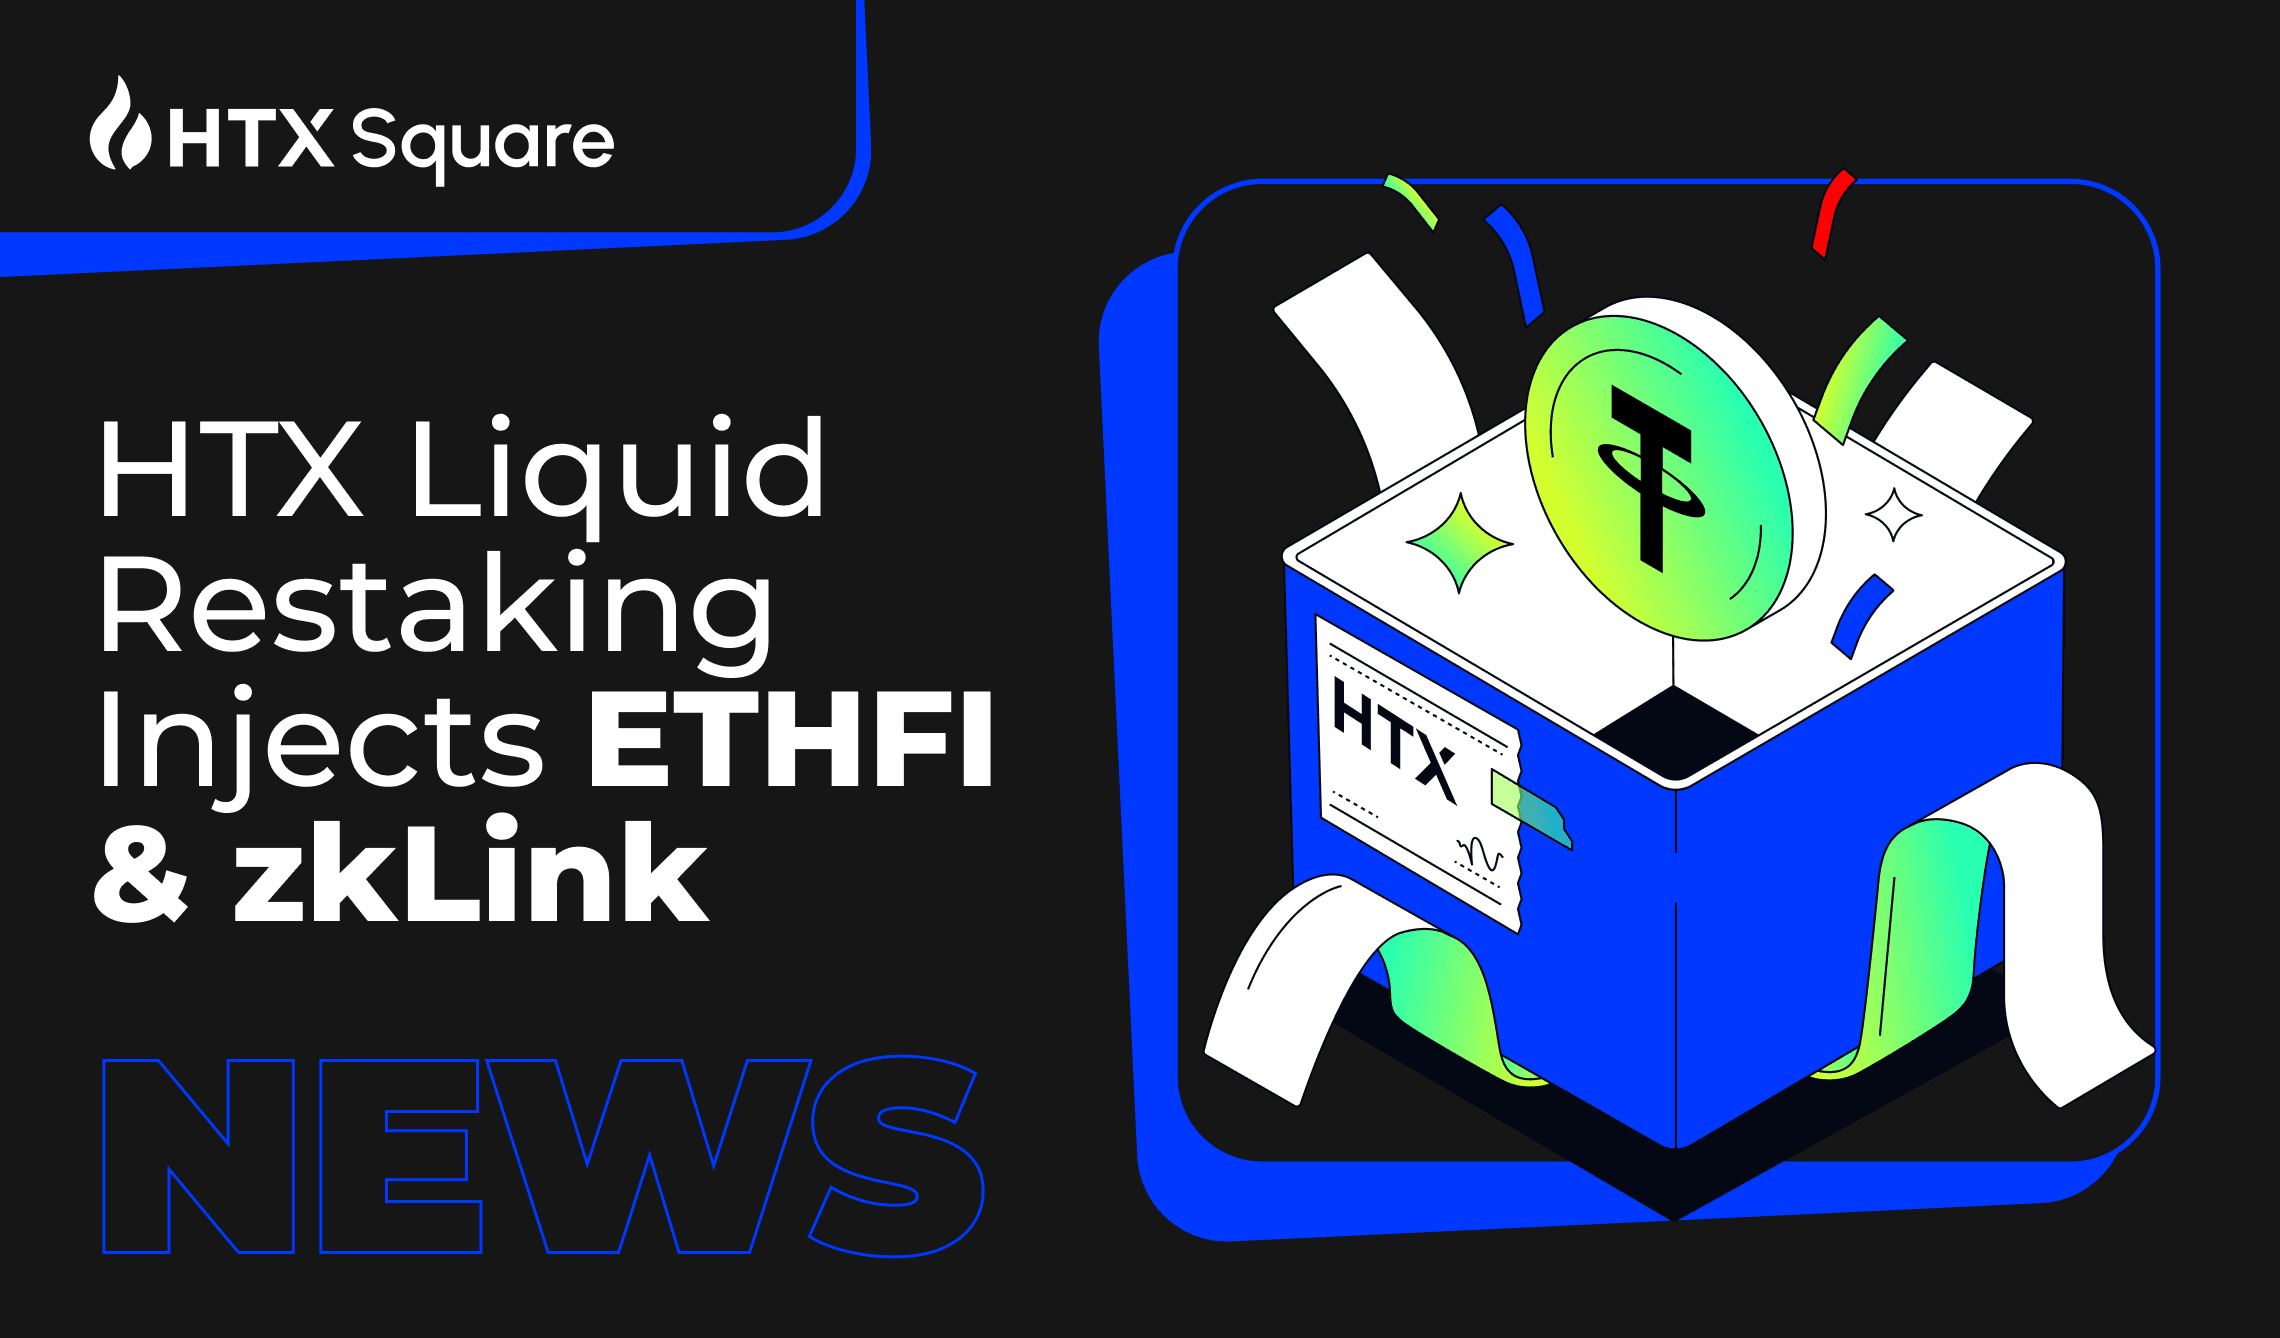 Time to Harvest! HTX Liquid Restaking Injects ETHFI & zkLink Airdrops and Allows Points Redemption Soon